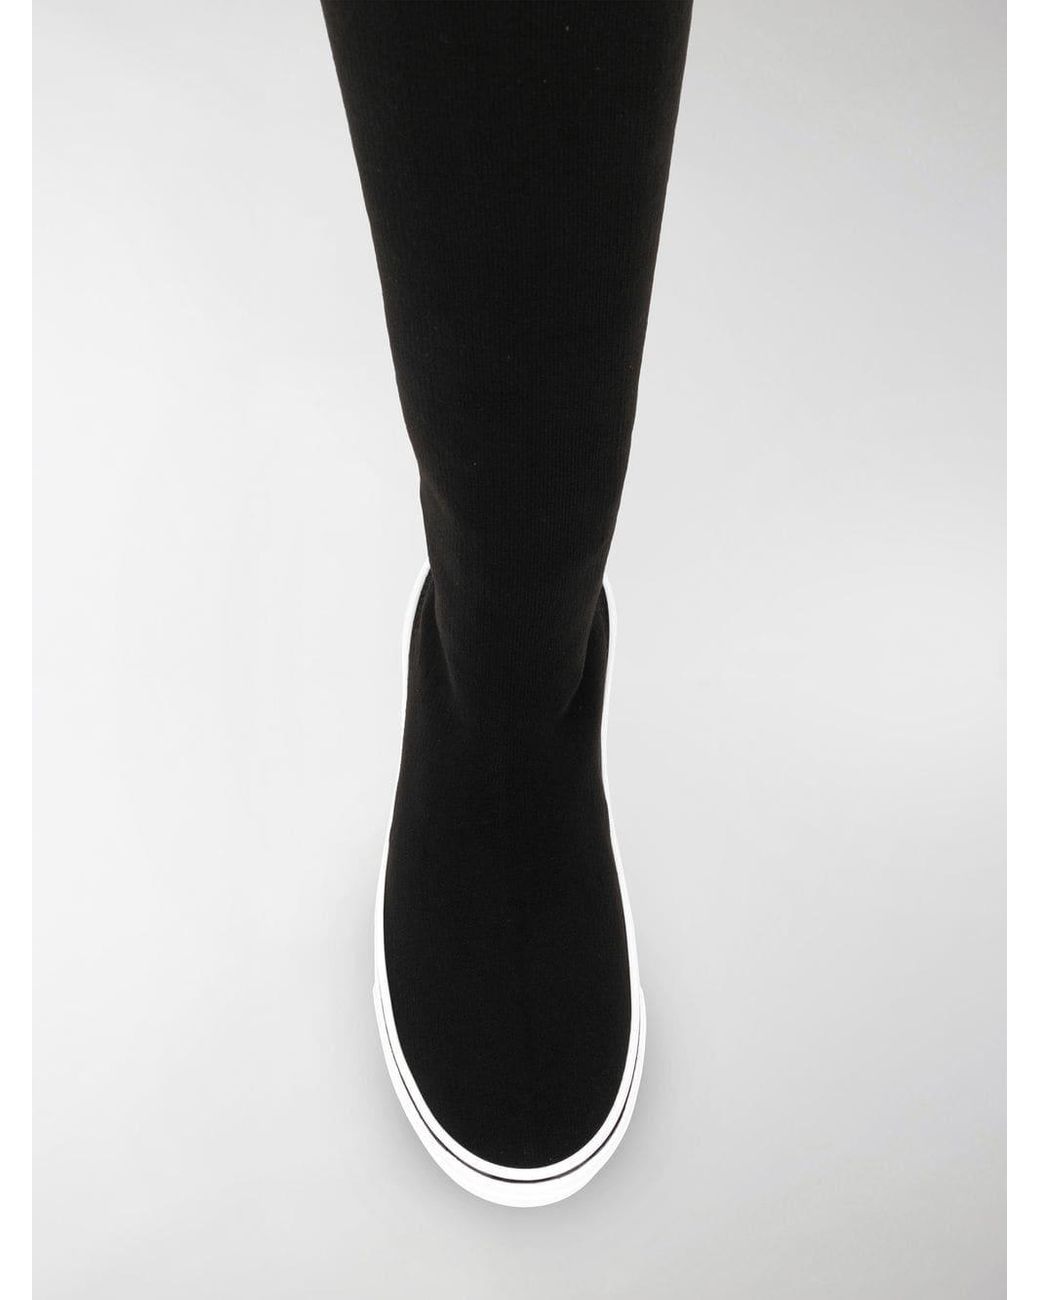 Givenchy George V Sock Sneaker Boots in Black | Lyst